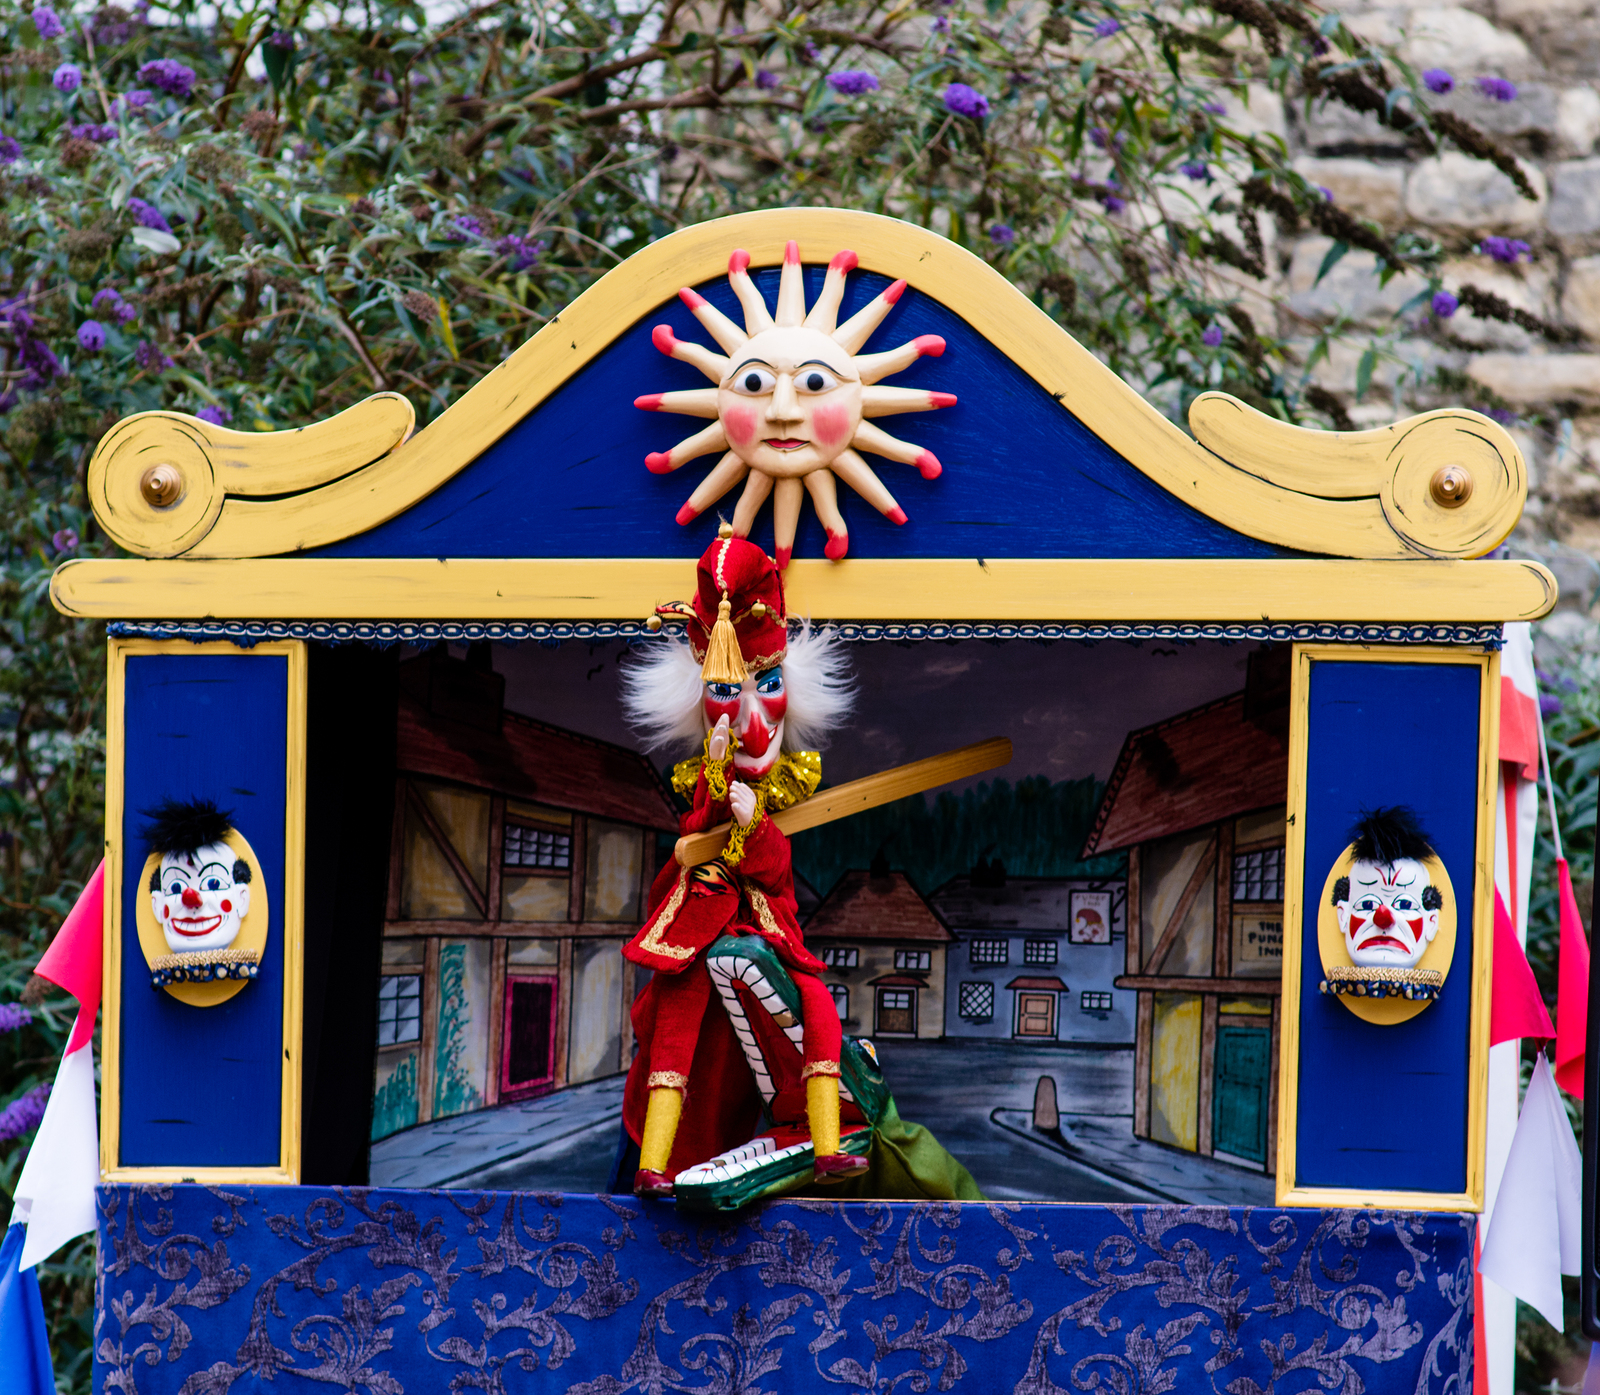 Puppet Theater at the Children's Museum of Sonoma County